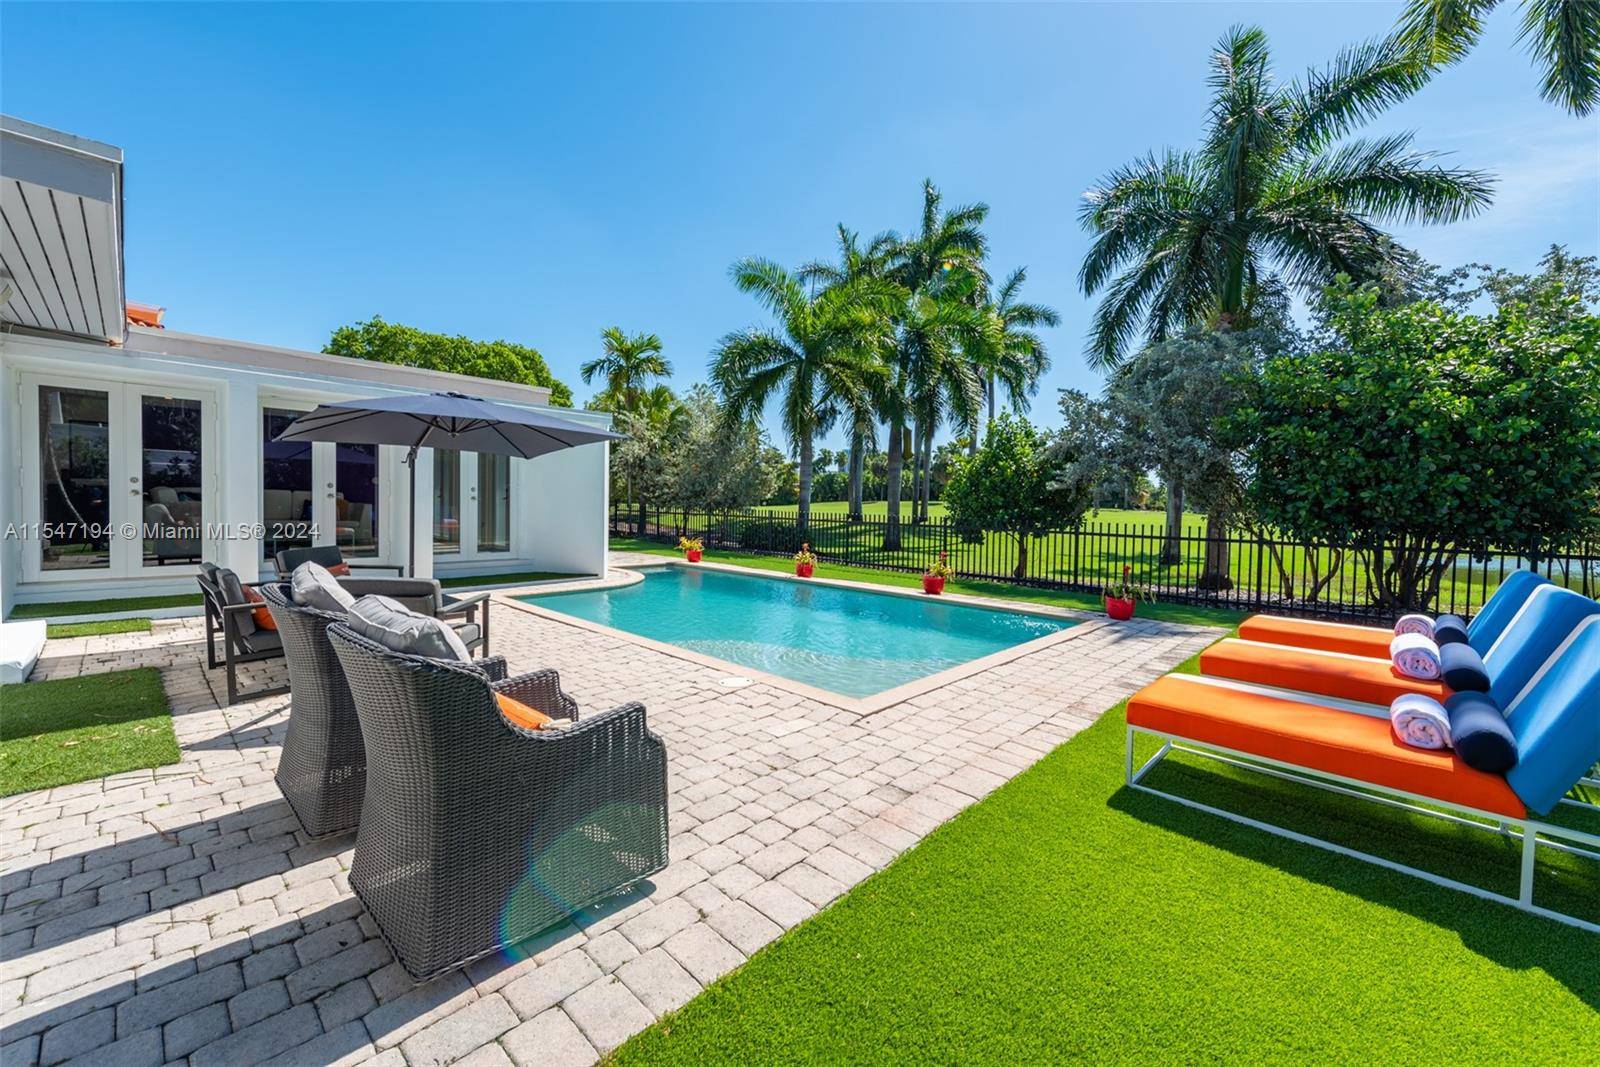 This stunning 3 bed 3 bath fully furnished Miami Beach pool home offers breathtaking views of La Gorce golf course.